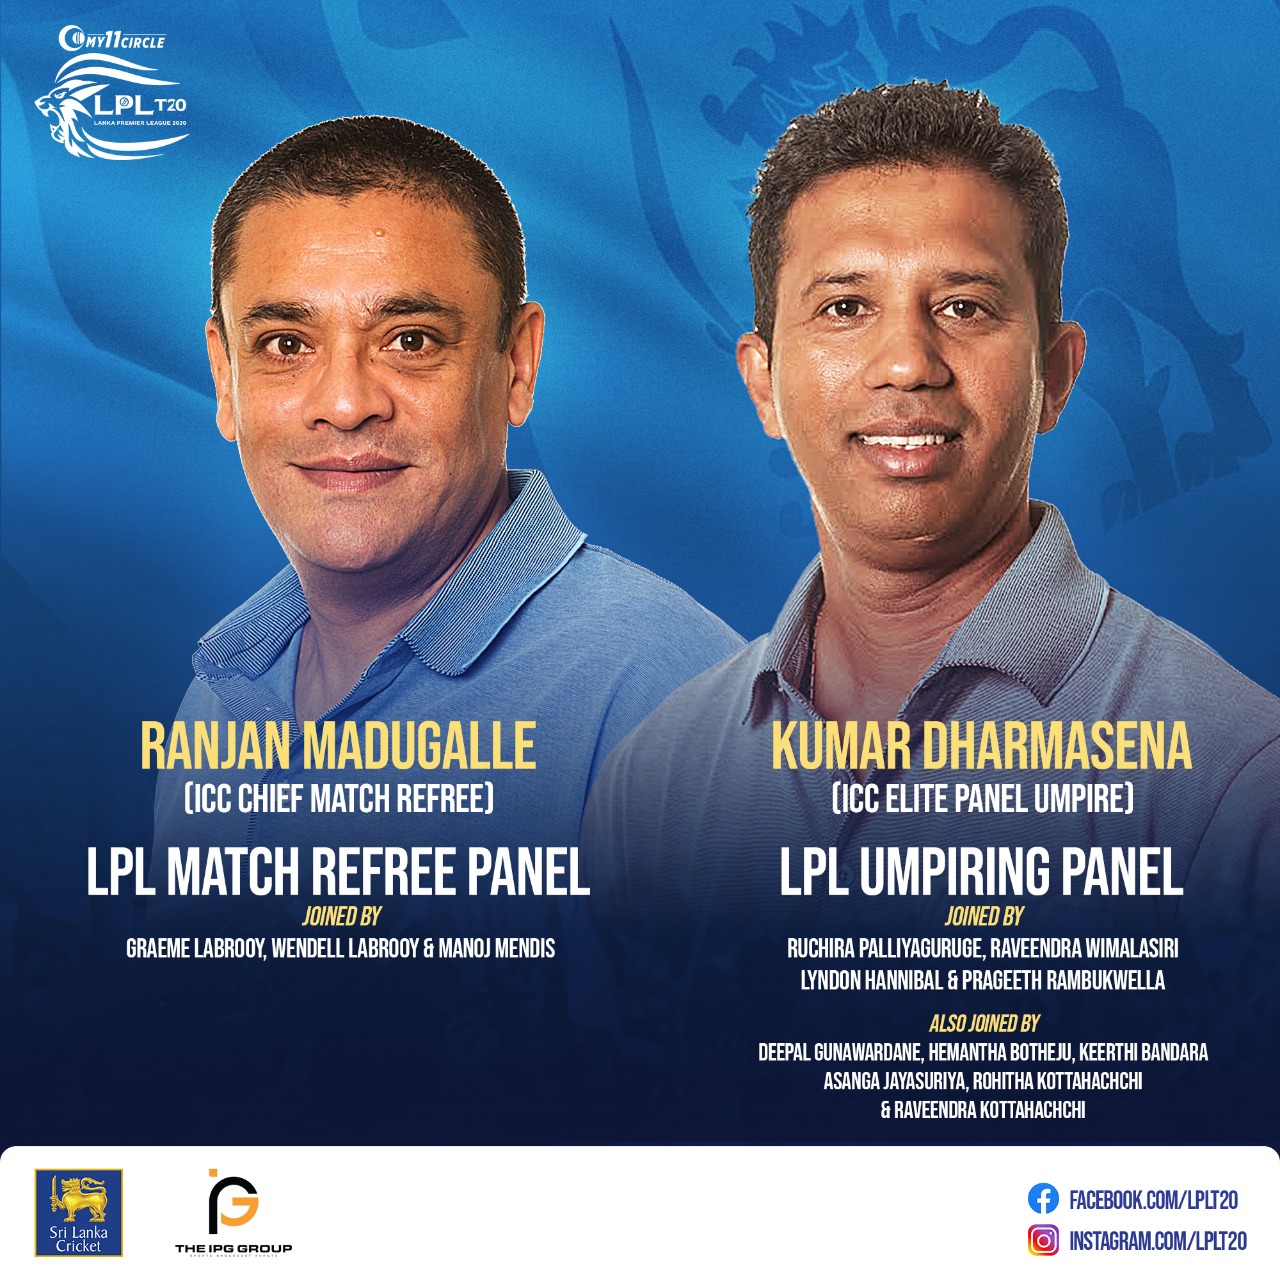 ICC Chief Match Referee Madugalle and ICC Elite Panel Umpire Dharmasena to feature in the LPL